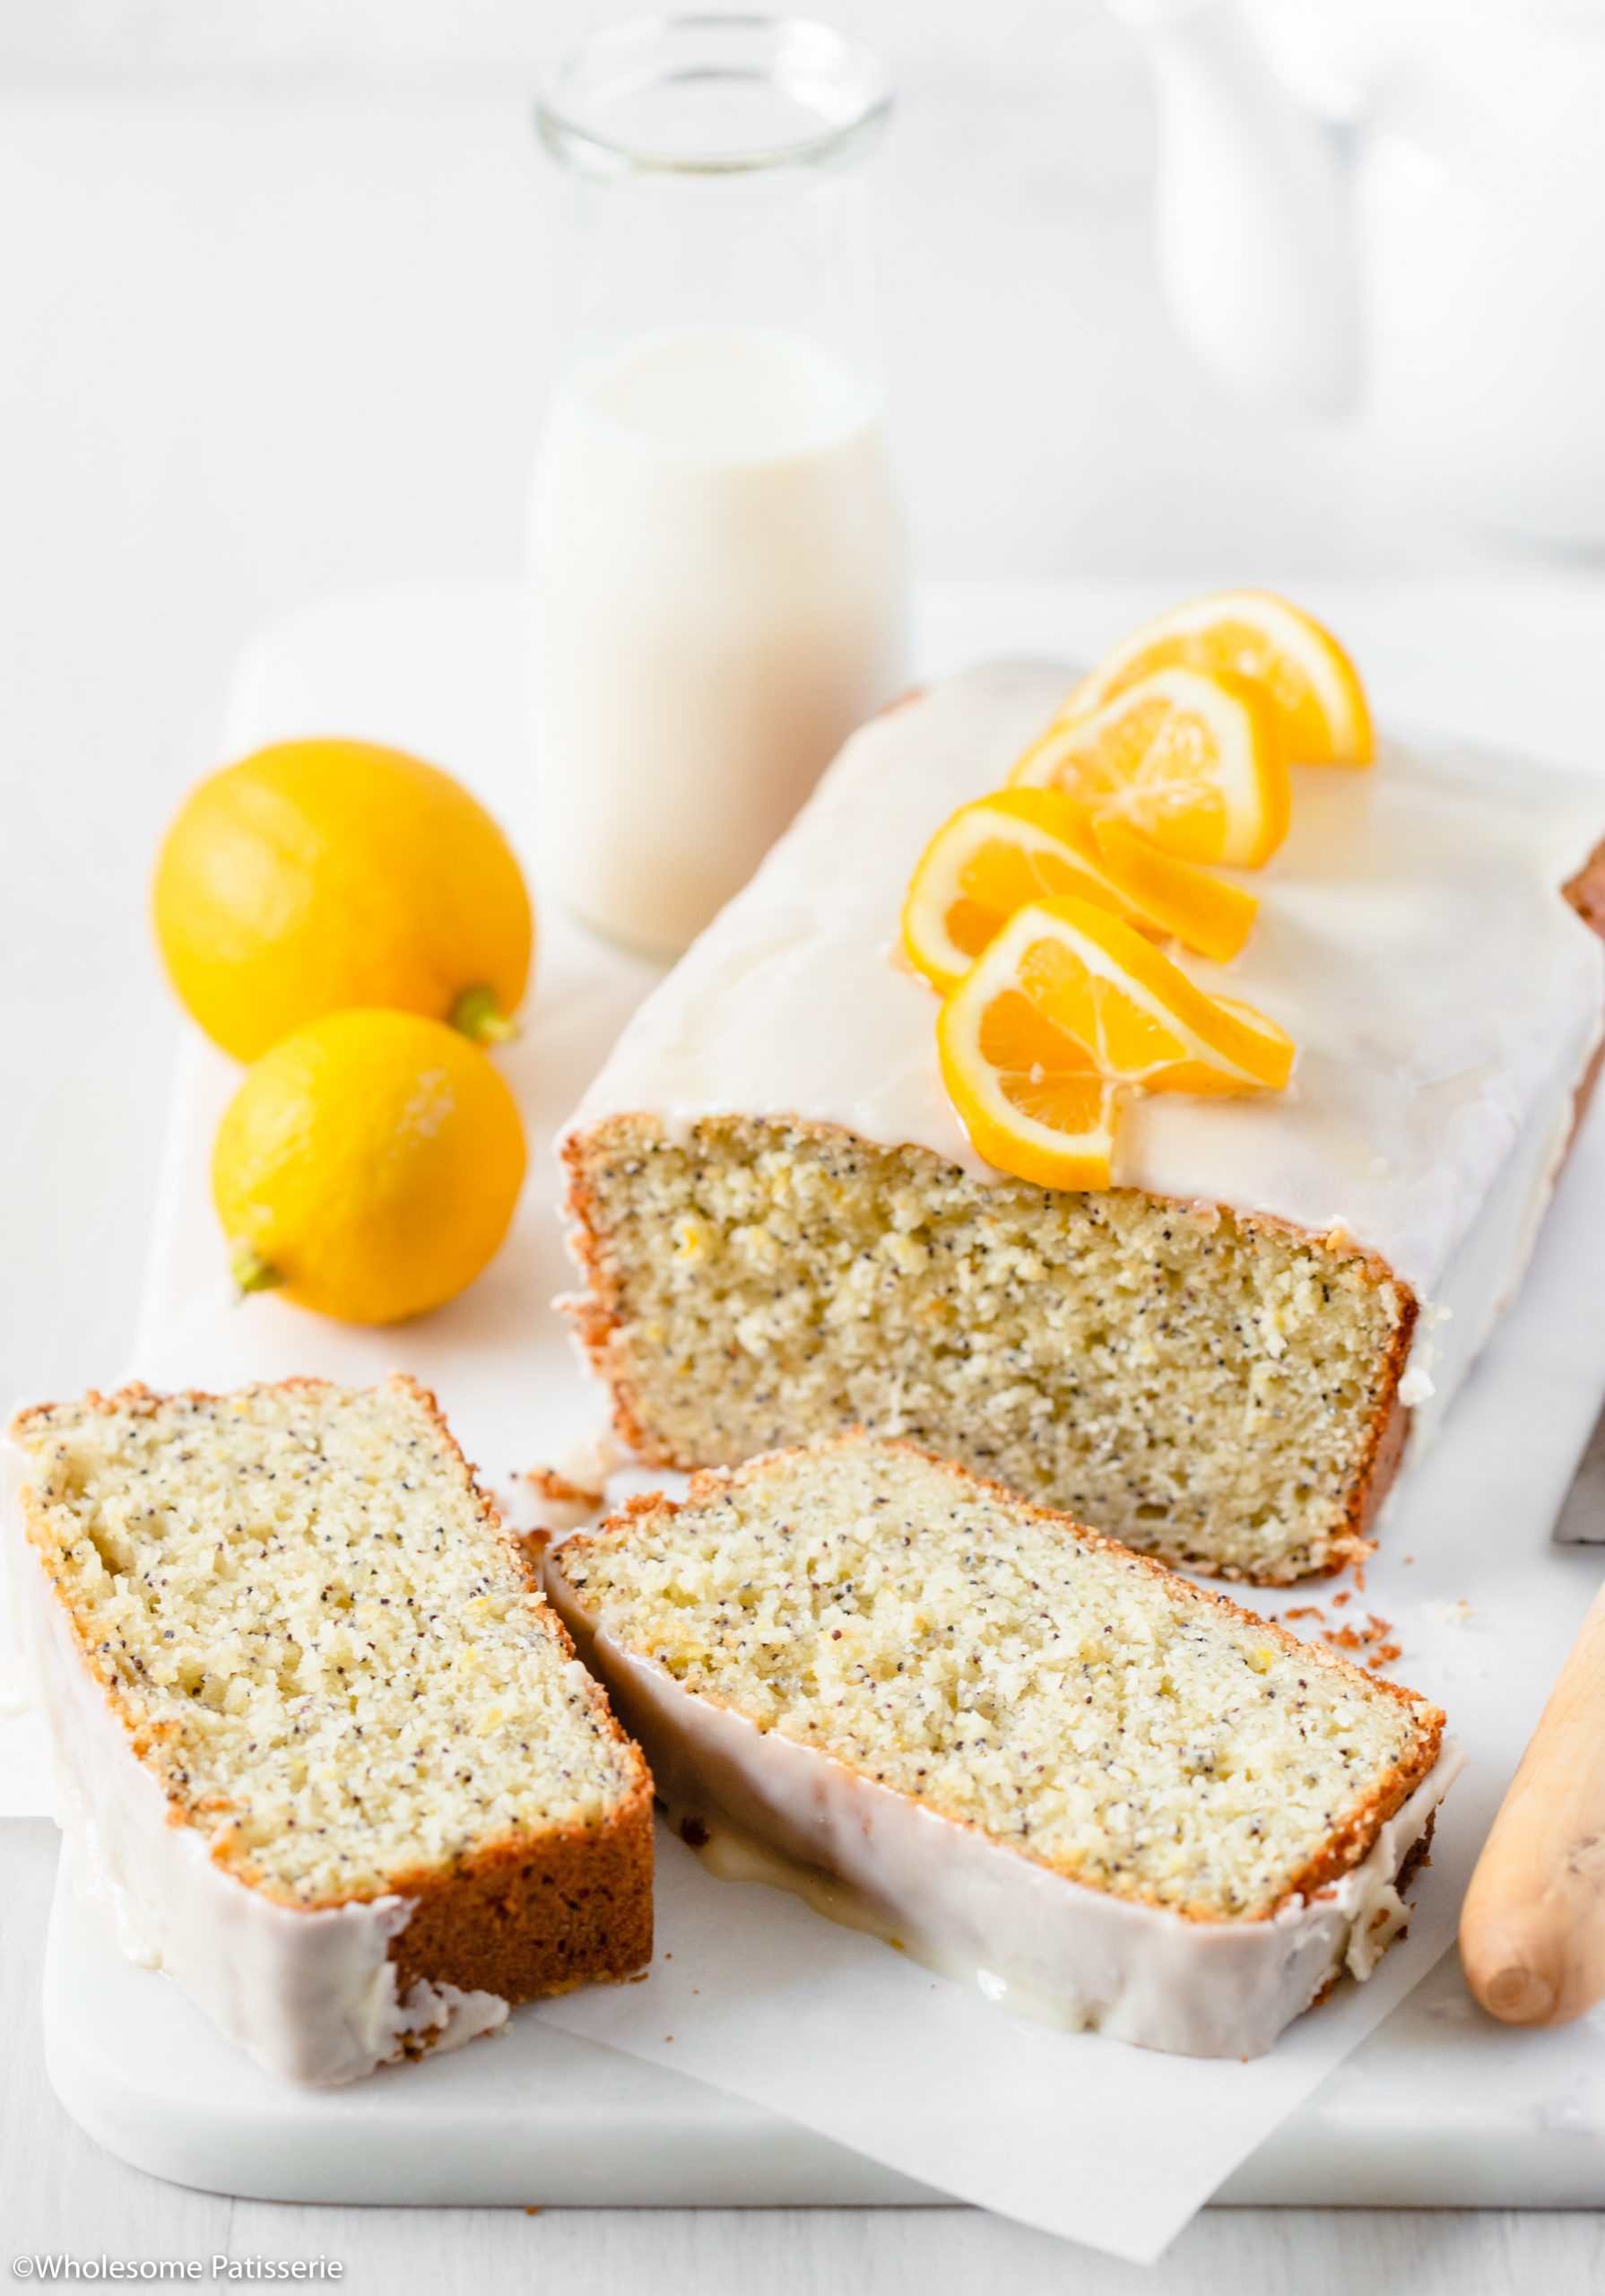 Lemon Poppy Seed Bread! A glorious classic loaf with beautiful poppy seeds that has been infused with a generous amount of grated lemon zest and freshly squeezed lemon juice. With a tender crumb yet sturdy crust, this loaf promises to offer a potent and bright lemon flavour and a slight crunch thanks to the poppy seeds. Drizzled with a 2-ingredient lemon icing which makes this bread next level scrumptious.